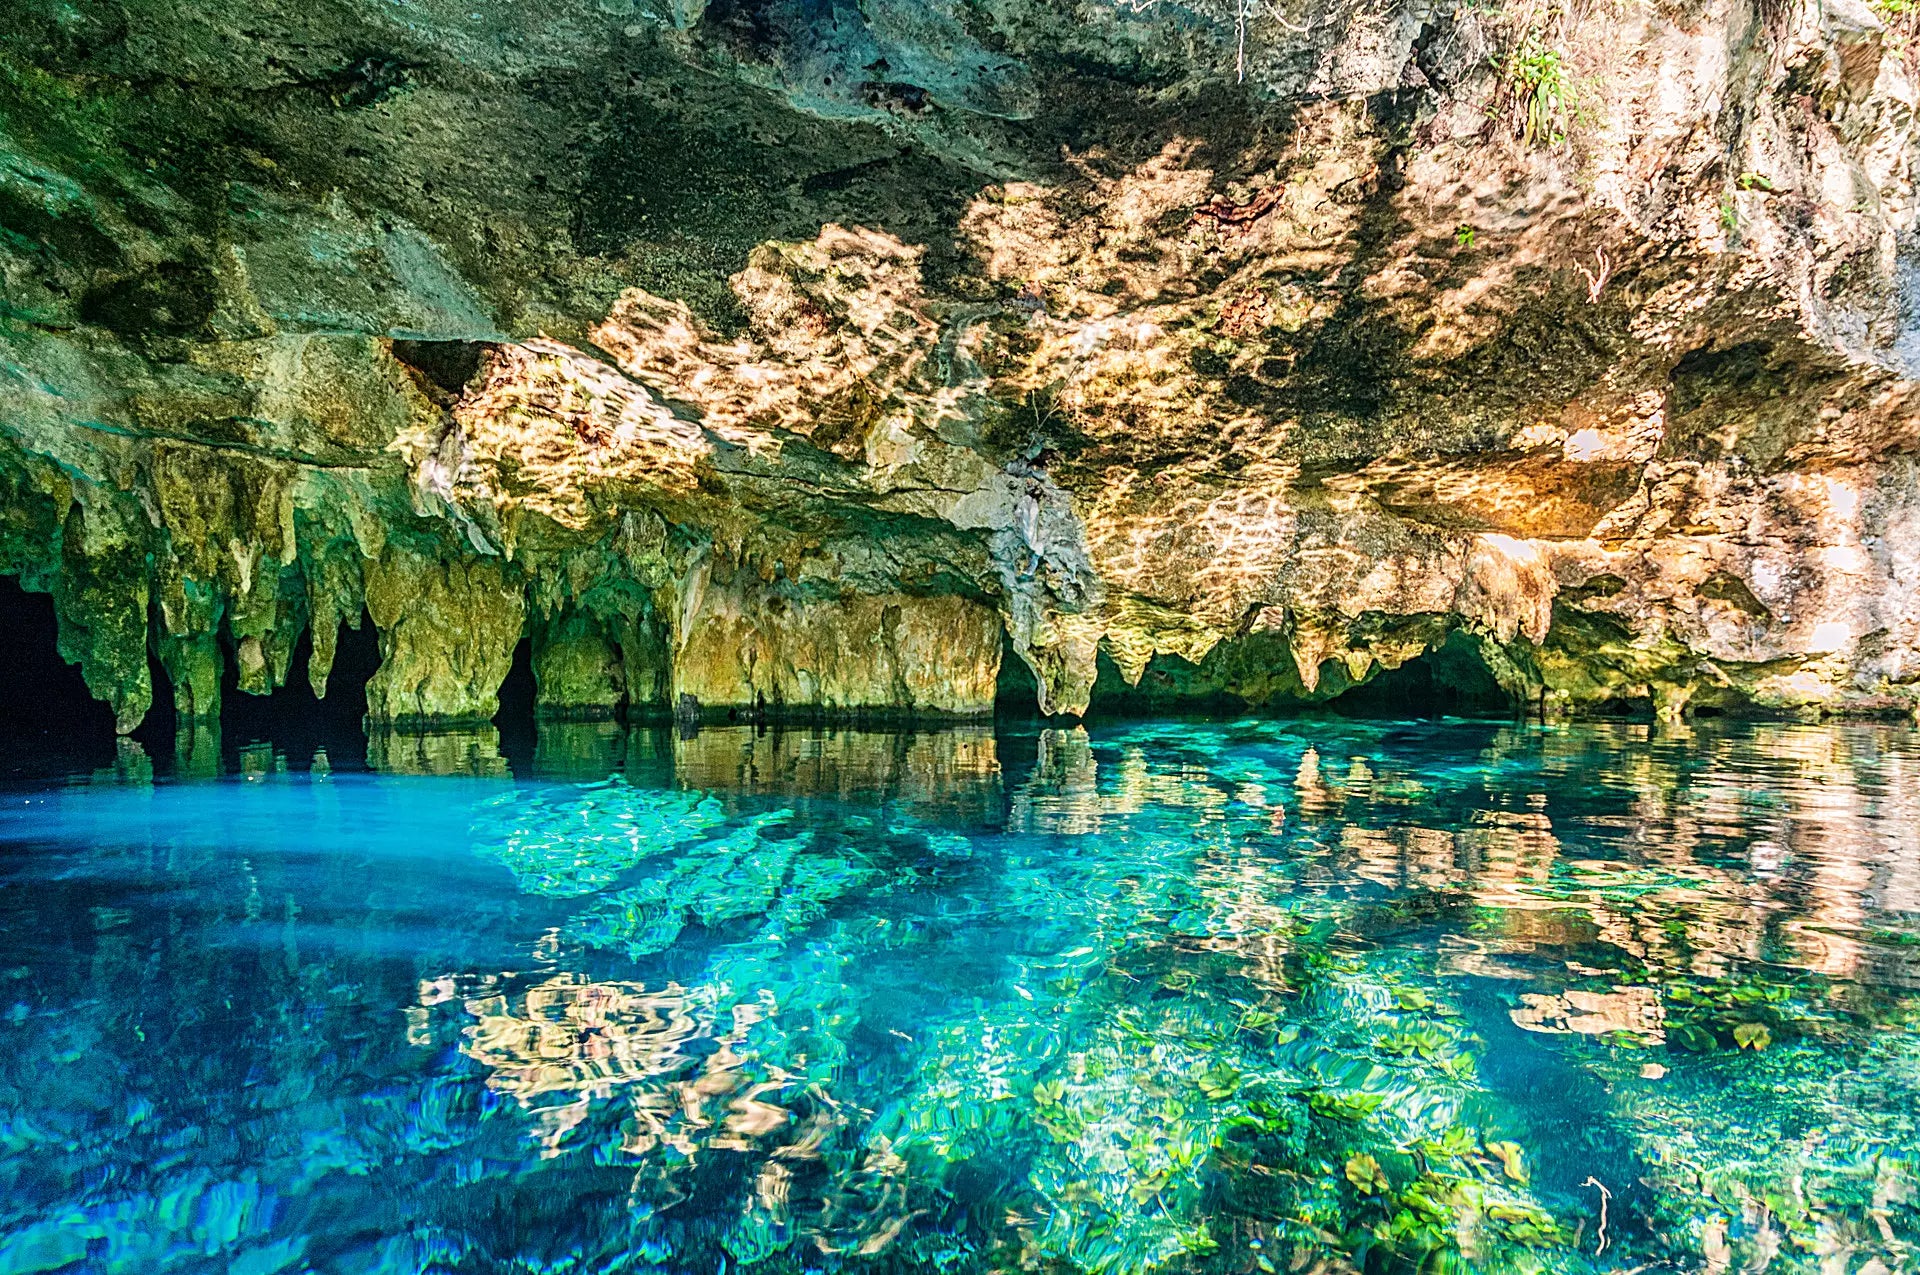 Dive into the Aquatic Explosion Tulum Adventure! 🚀🌟 Experience mind-blowing aquatic thrills – zipline into refreshing waters, rappel down vertical walls, conquer rugged terrains on ATVs, immerse in Mayan culture, and explore a mysterious cave cenote. Unforgettable day from Playa del Carmen and Tulum! 🏜️🪢🏊‍♂️🚵‍♀️ #AquaticExplosion #ZiplinesAndATVs #MayanCeremony #CaveCenoteExploration